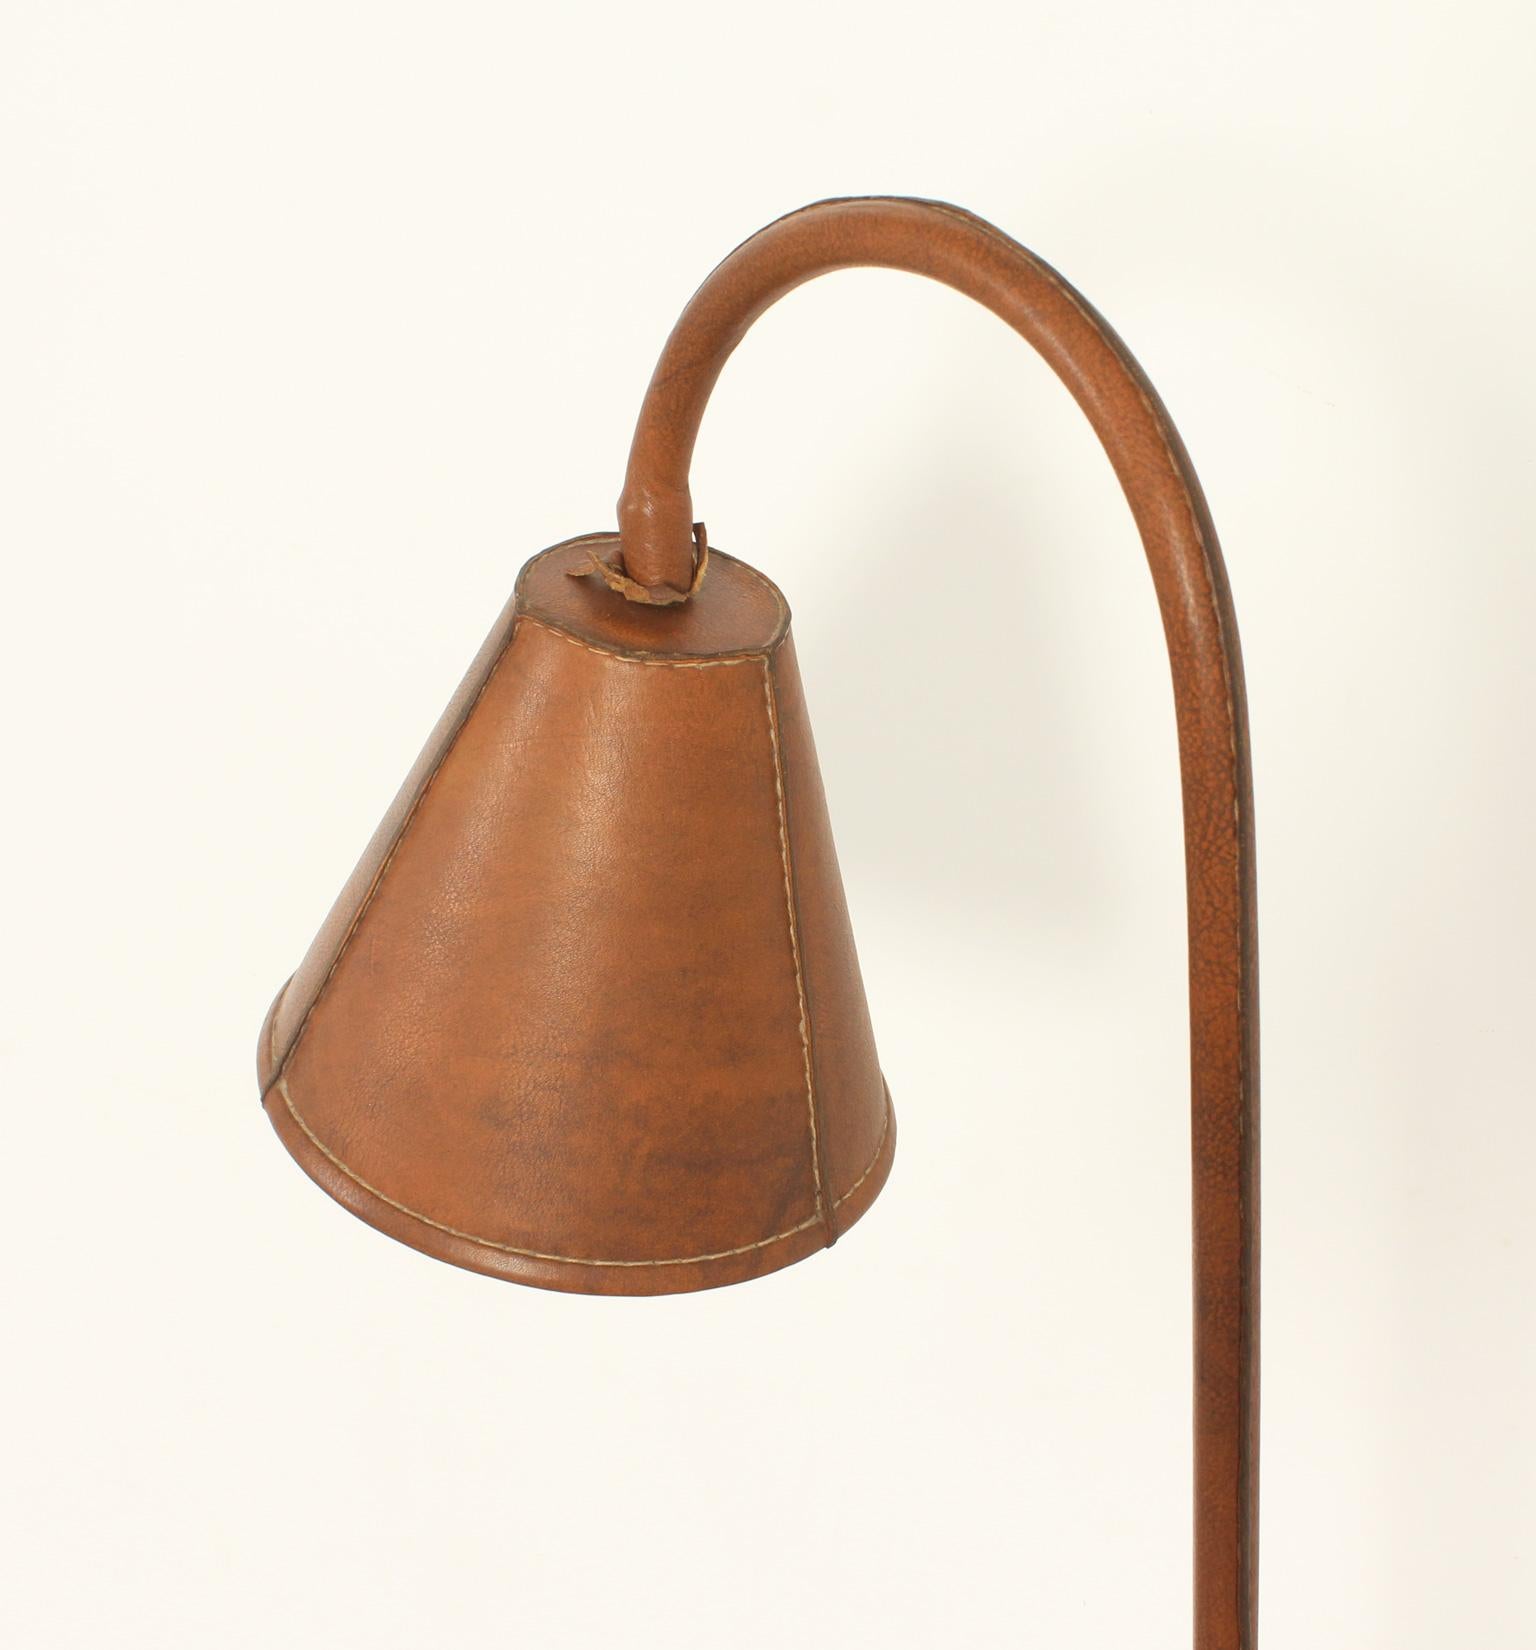 Floor Lamp by Valenti in Brown Leather, Spain, 1950's For Sale 2